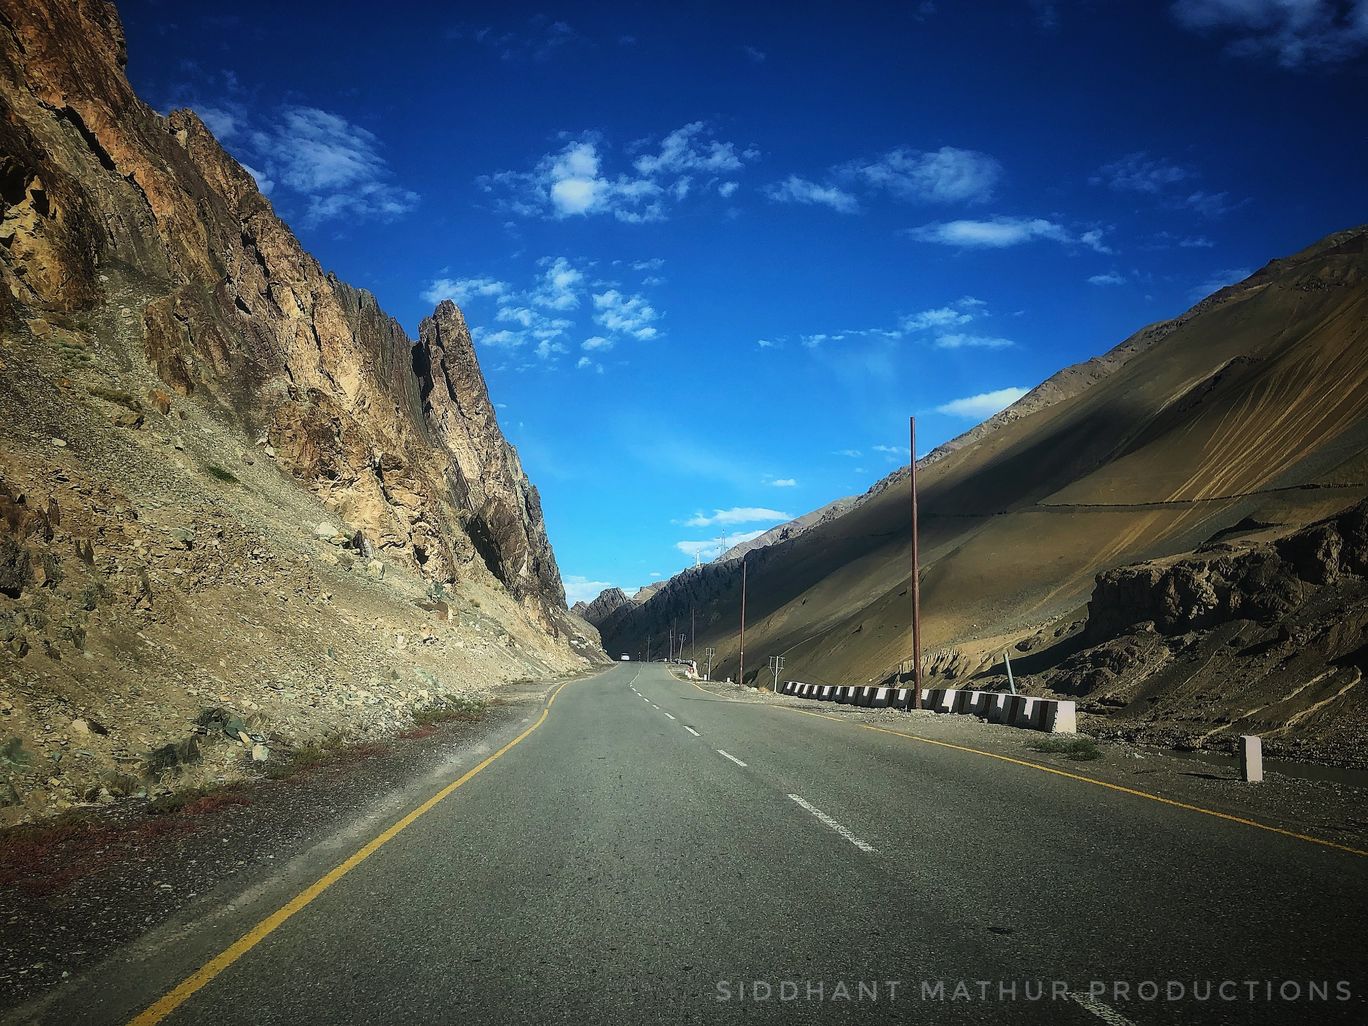 Photo of Leh - Always say yes to adventures! By Siddhant Mathur